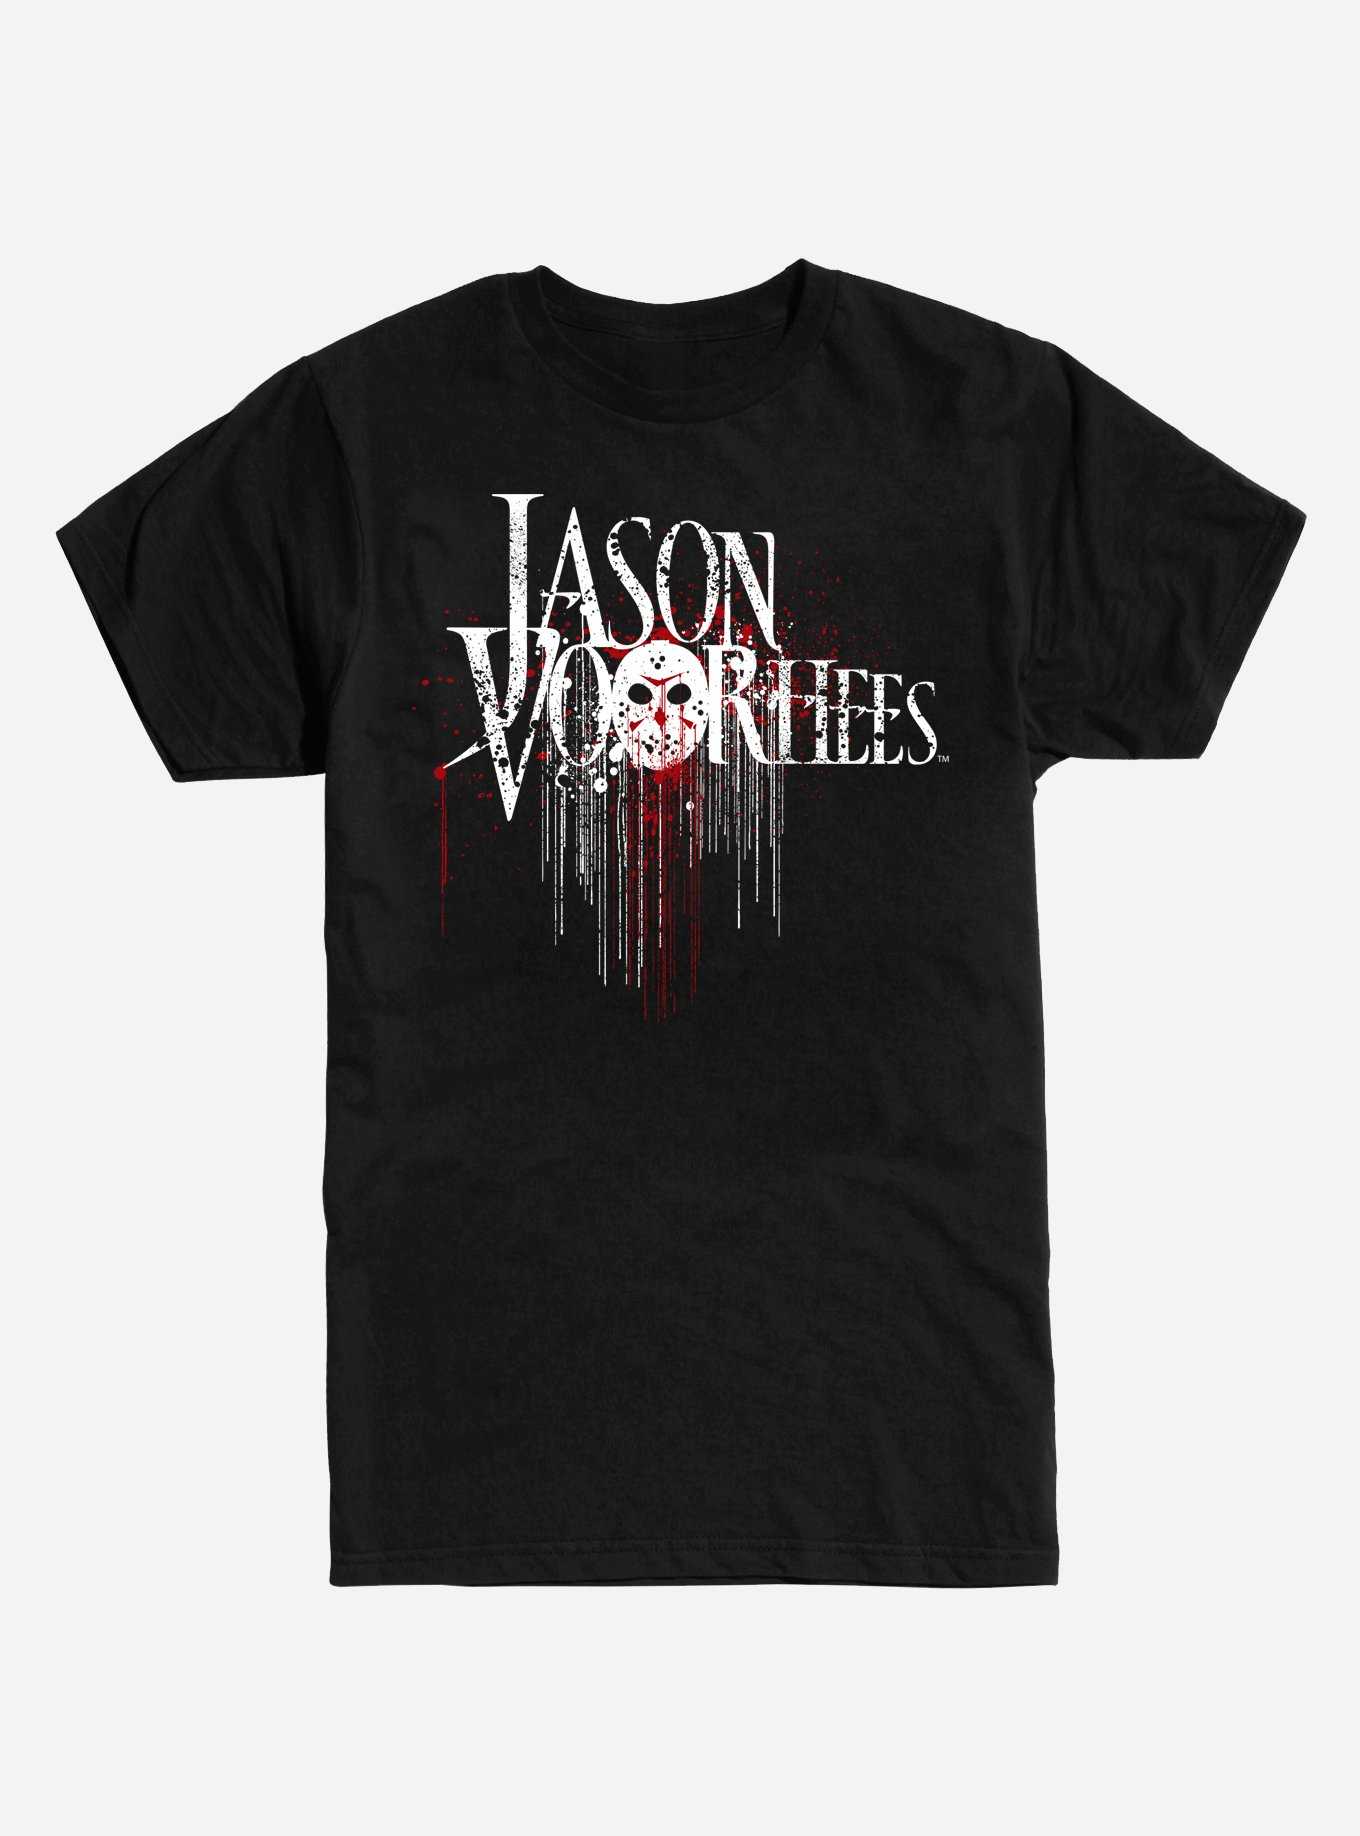 Friday the 13th Jason Voorhees Mask T-Shirt, , hi-res